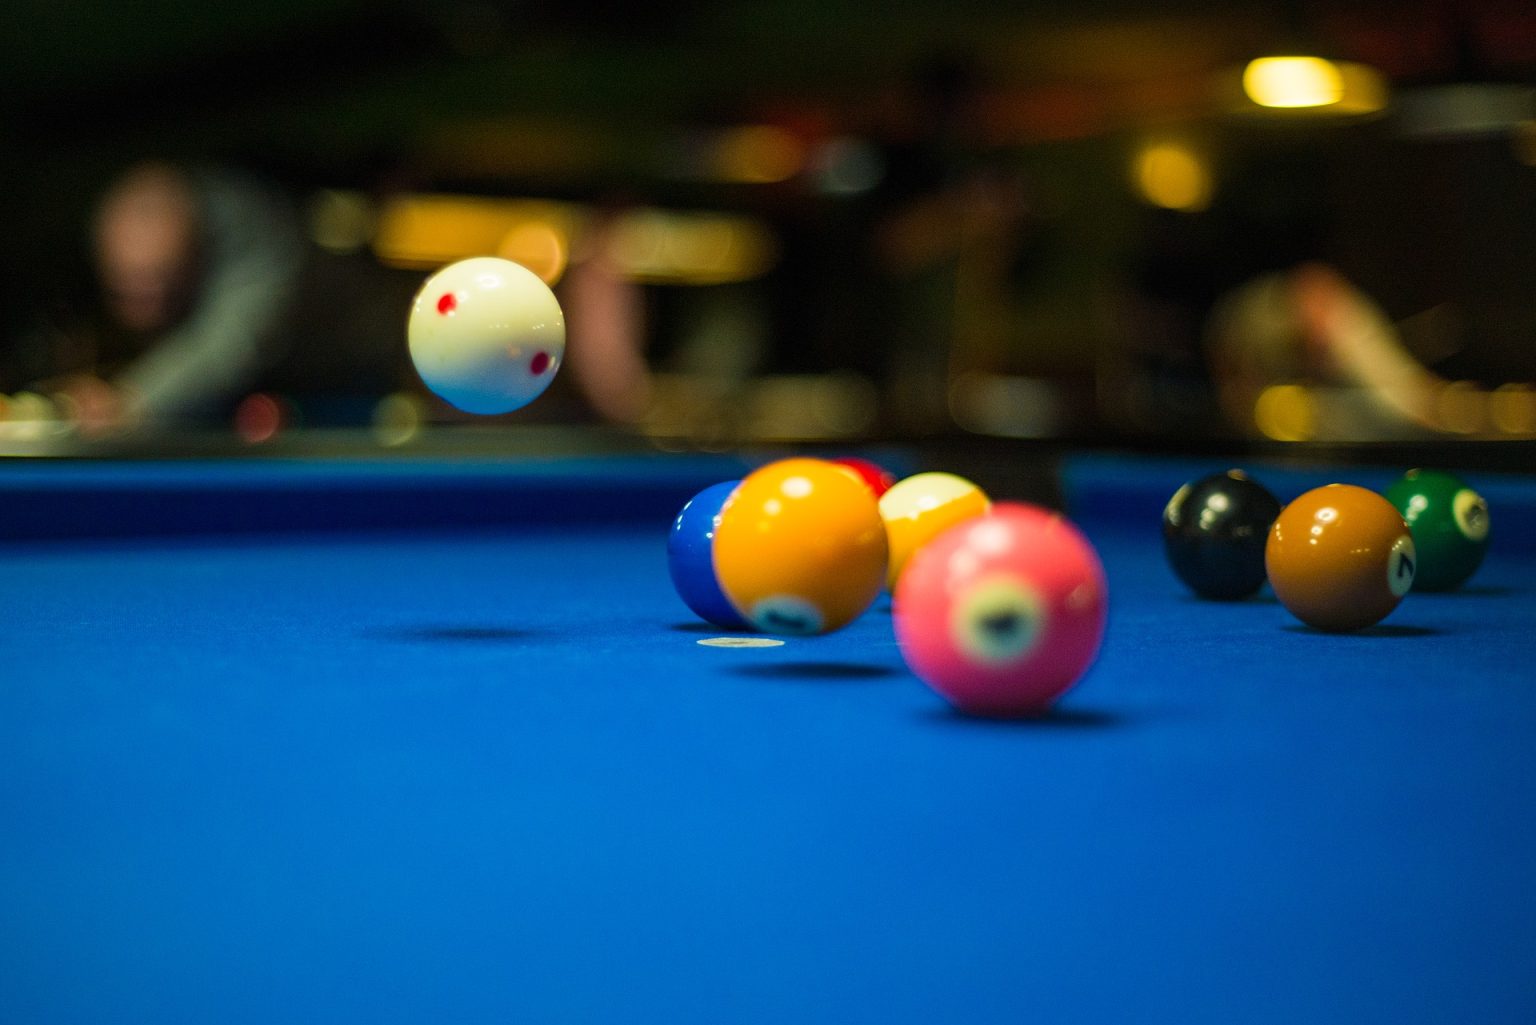 8-ball-pool-rules-know-all-the-tips-tricks-pool-cue-champ